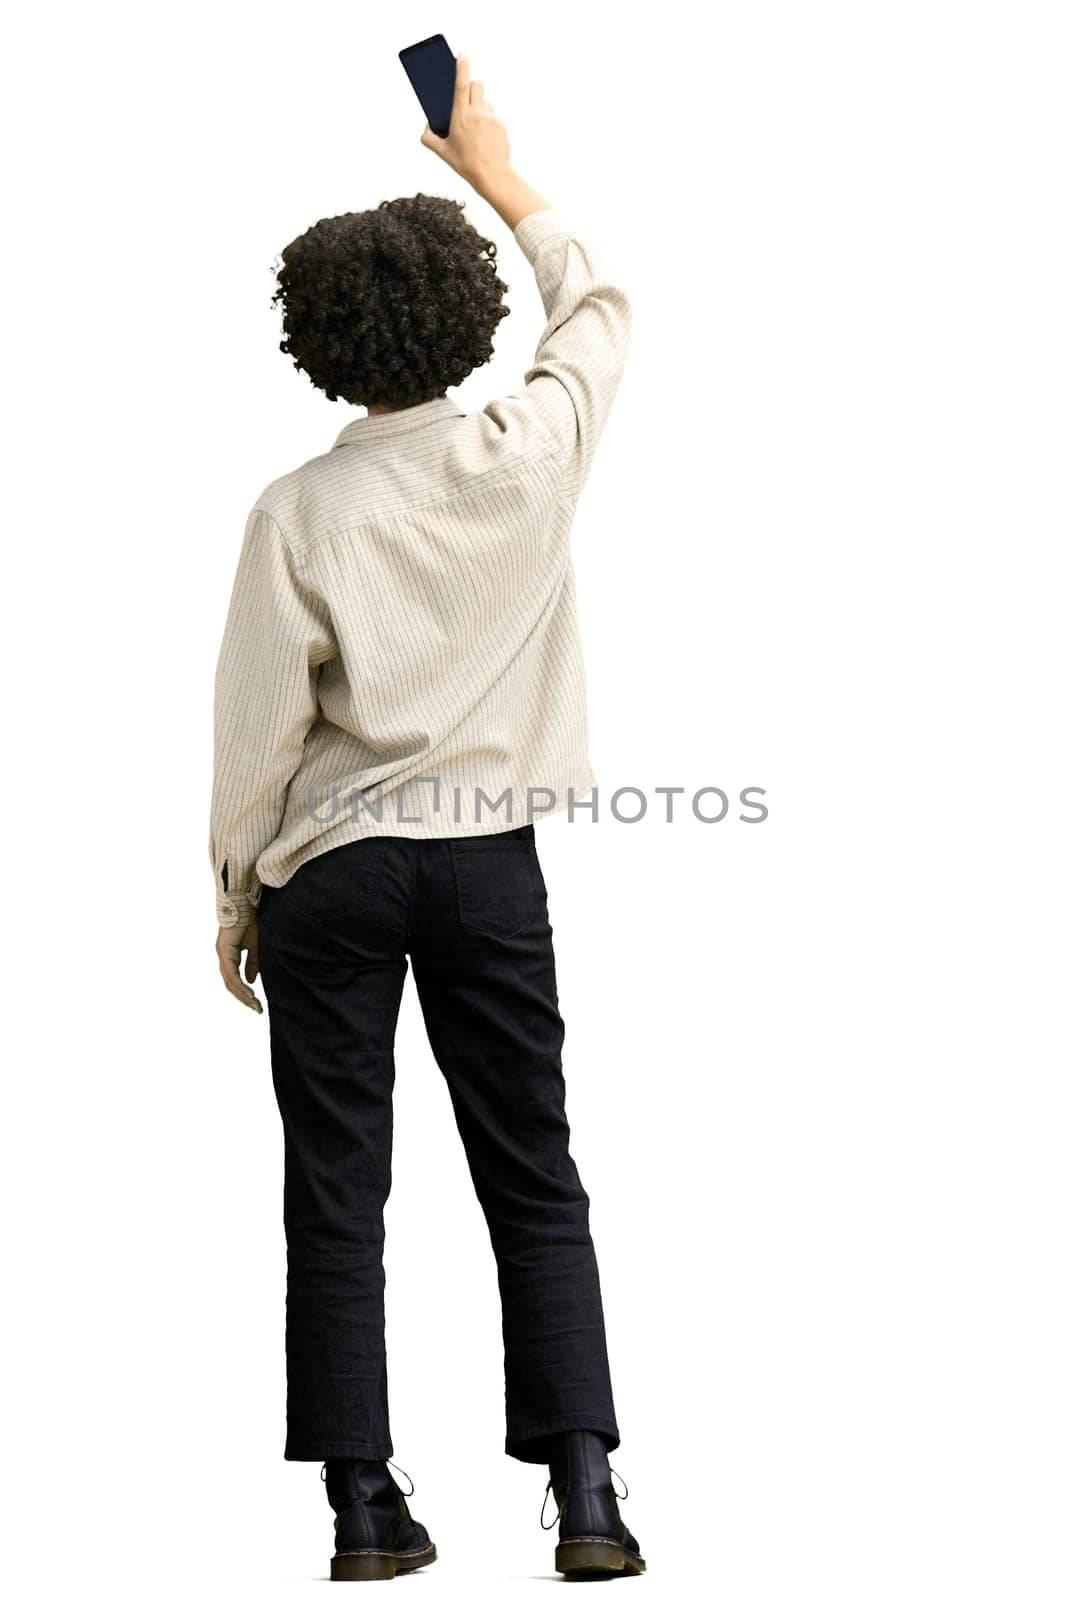 A woman, full-length, on a white background, waving her phone by Prosto